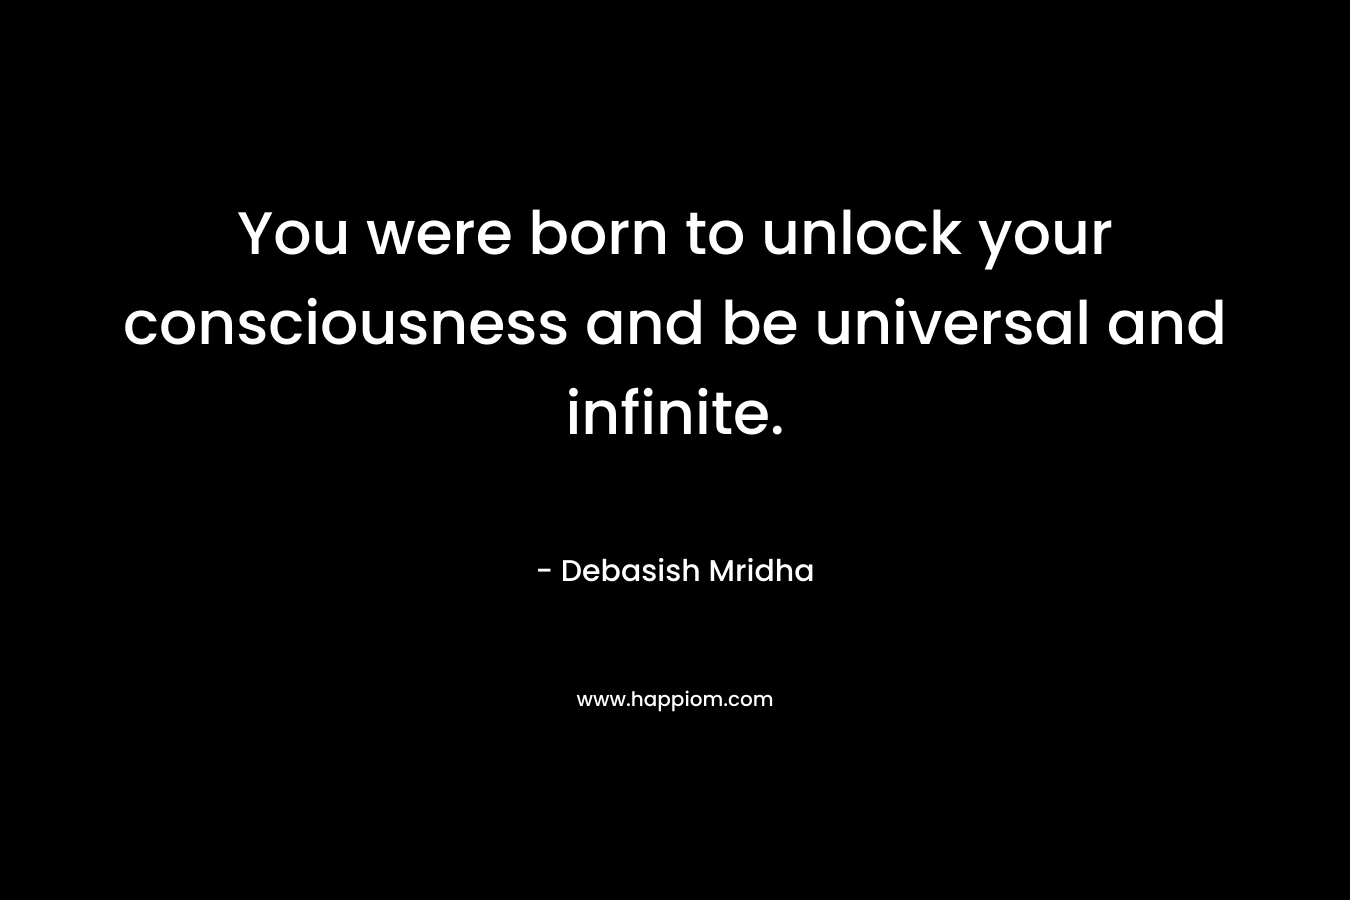 You were born to unlock your consciousness and be universal and infinite.